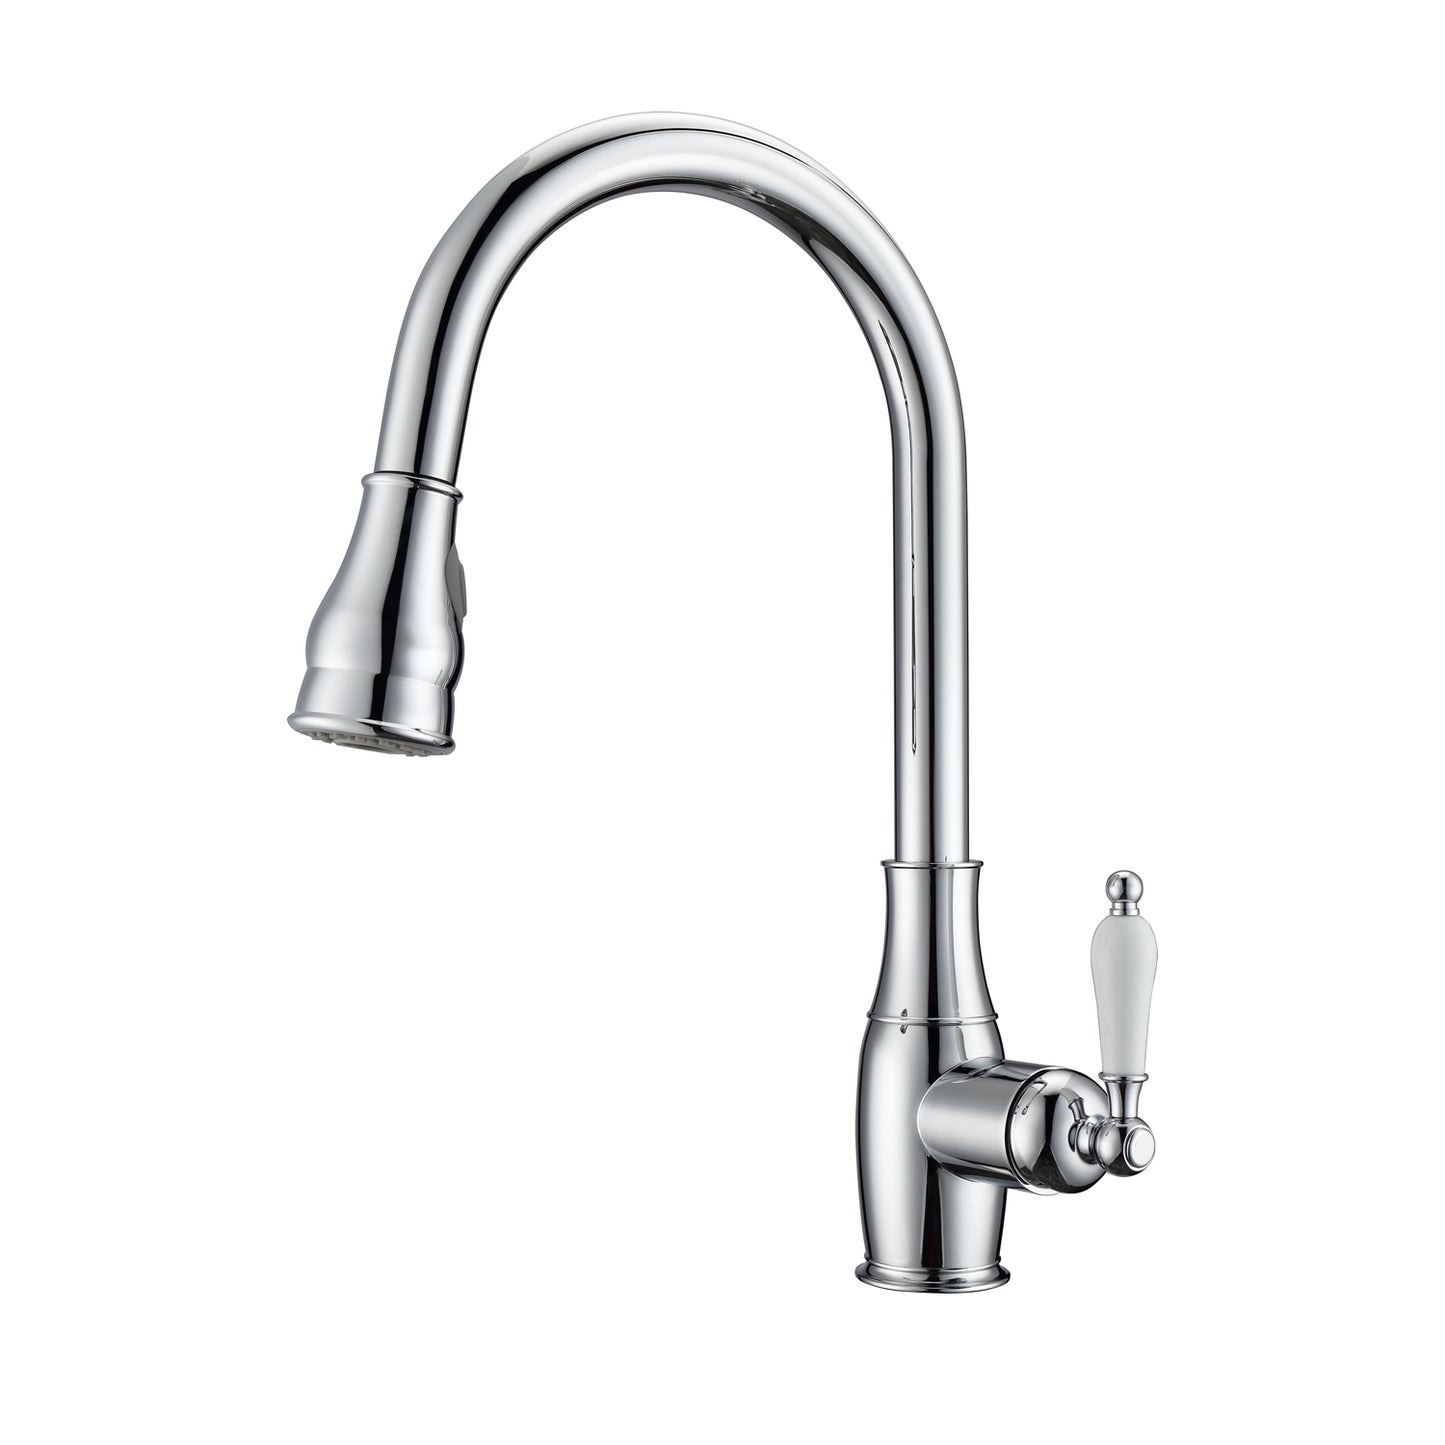 Caryl Kitchen Faucet, Pull-Out Sprayer, Single Porcelain Lever Handle, Chrome